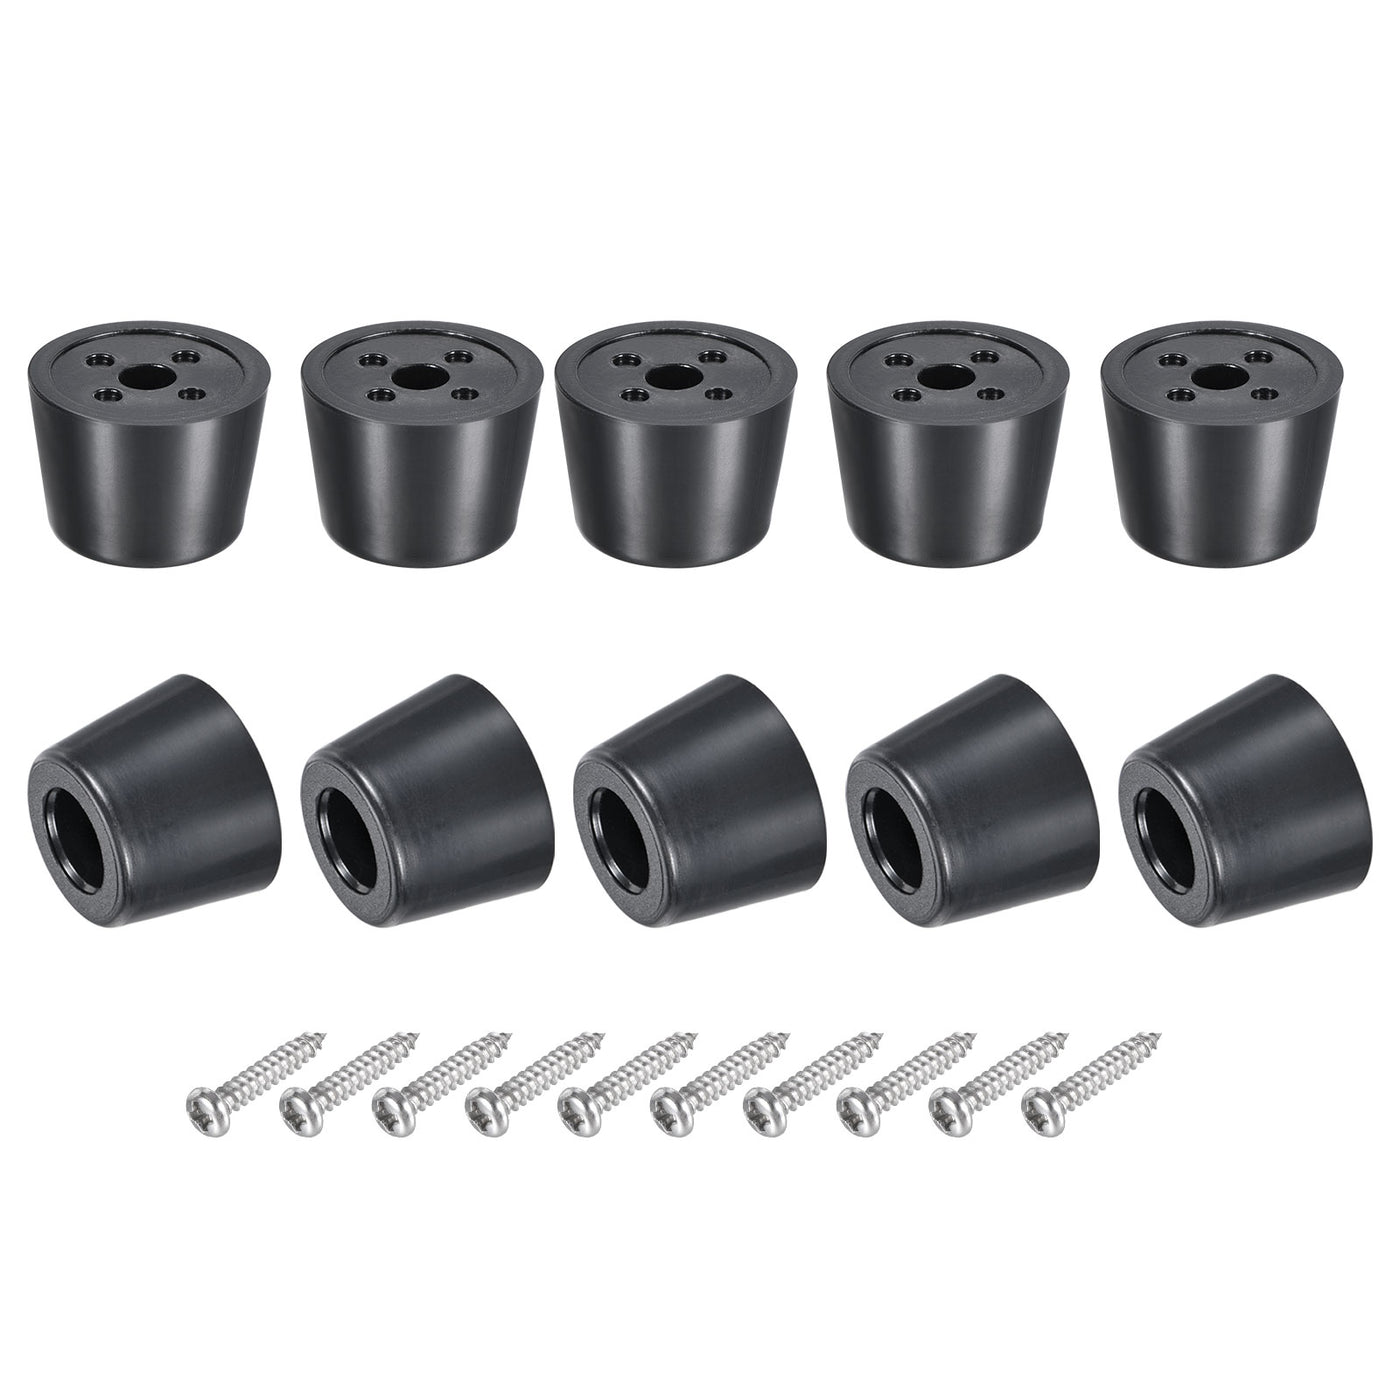 uxcell Uxcell Rubber Bumper Feet, 0.63" H x 0.91" W Round Pads with Stainless Steel Washer and Screws for Furniture, Appliances, Electronics 10 Pcs